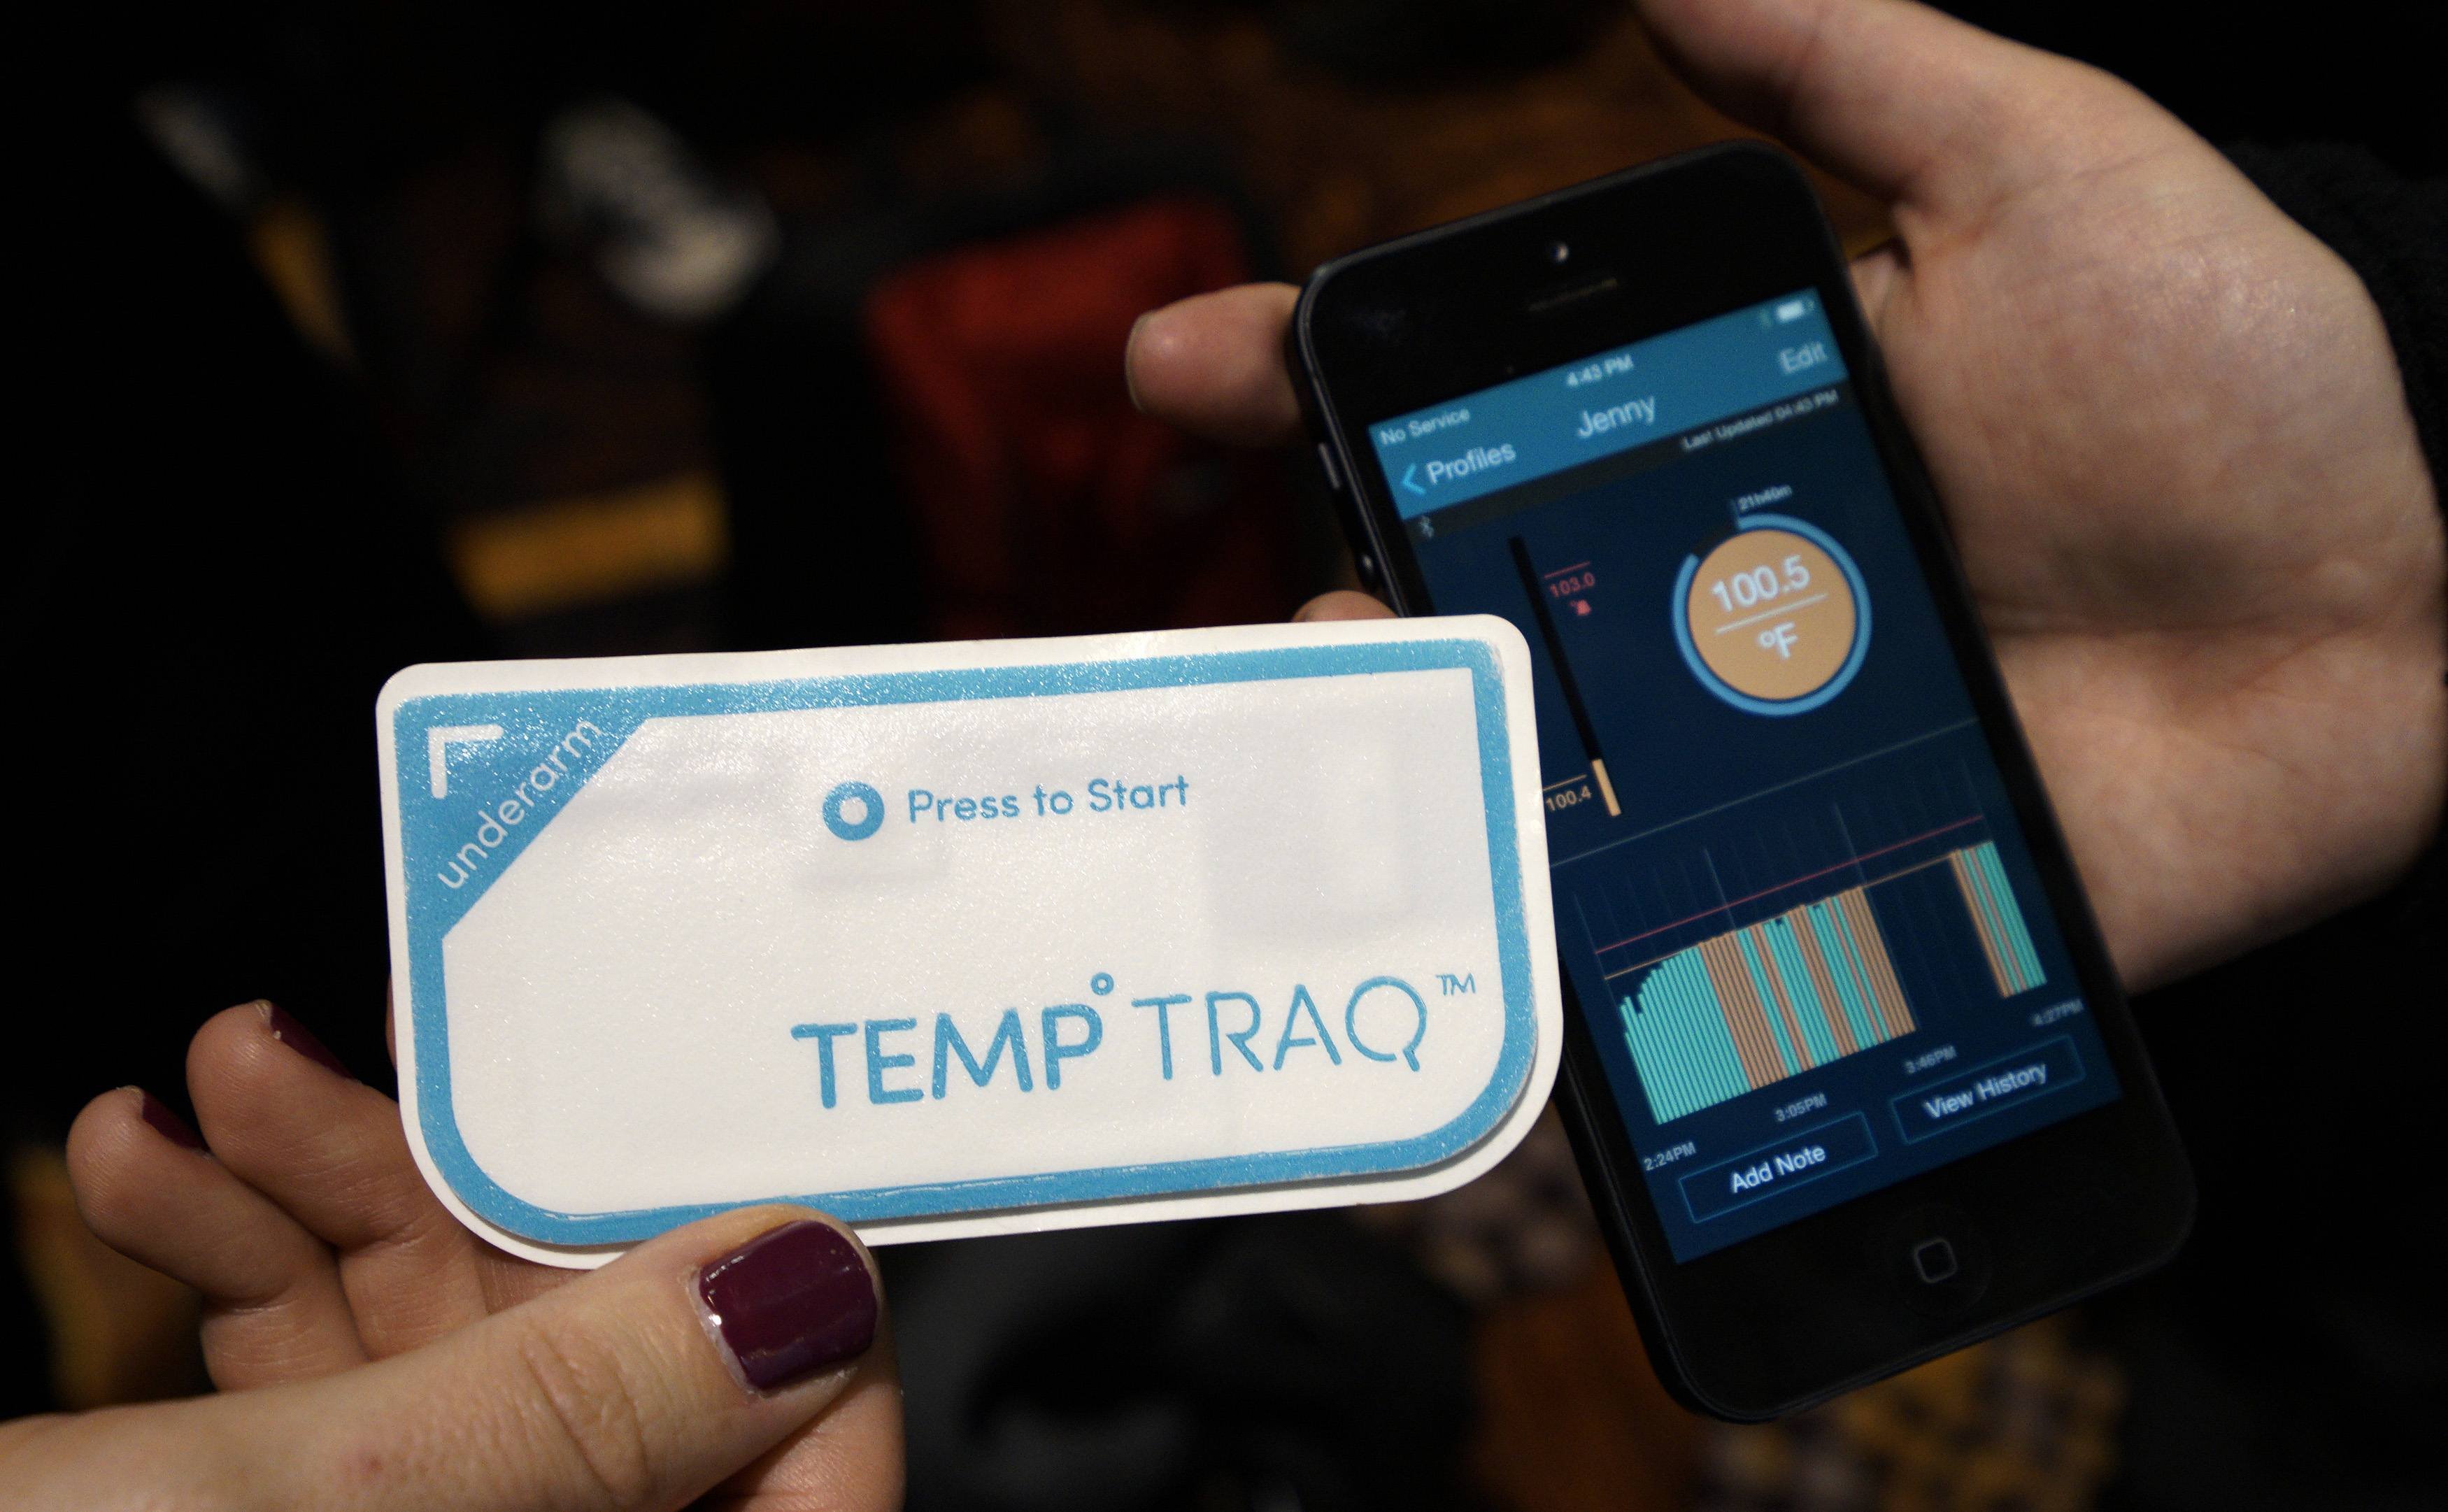 The TempTraq body temperature wearable bluetooth thermometer and its accompanying app are displayed at the International Consumer Electronics show (CES) in Las Vegas on Jan. 4, 2014. (Rick Wilking—Reuters)